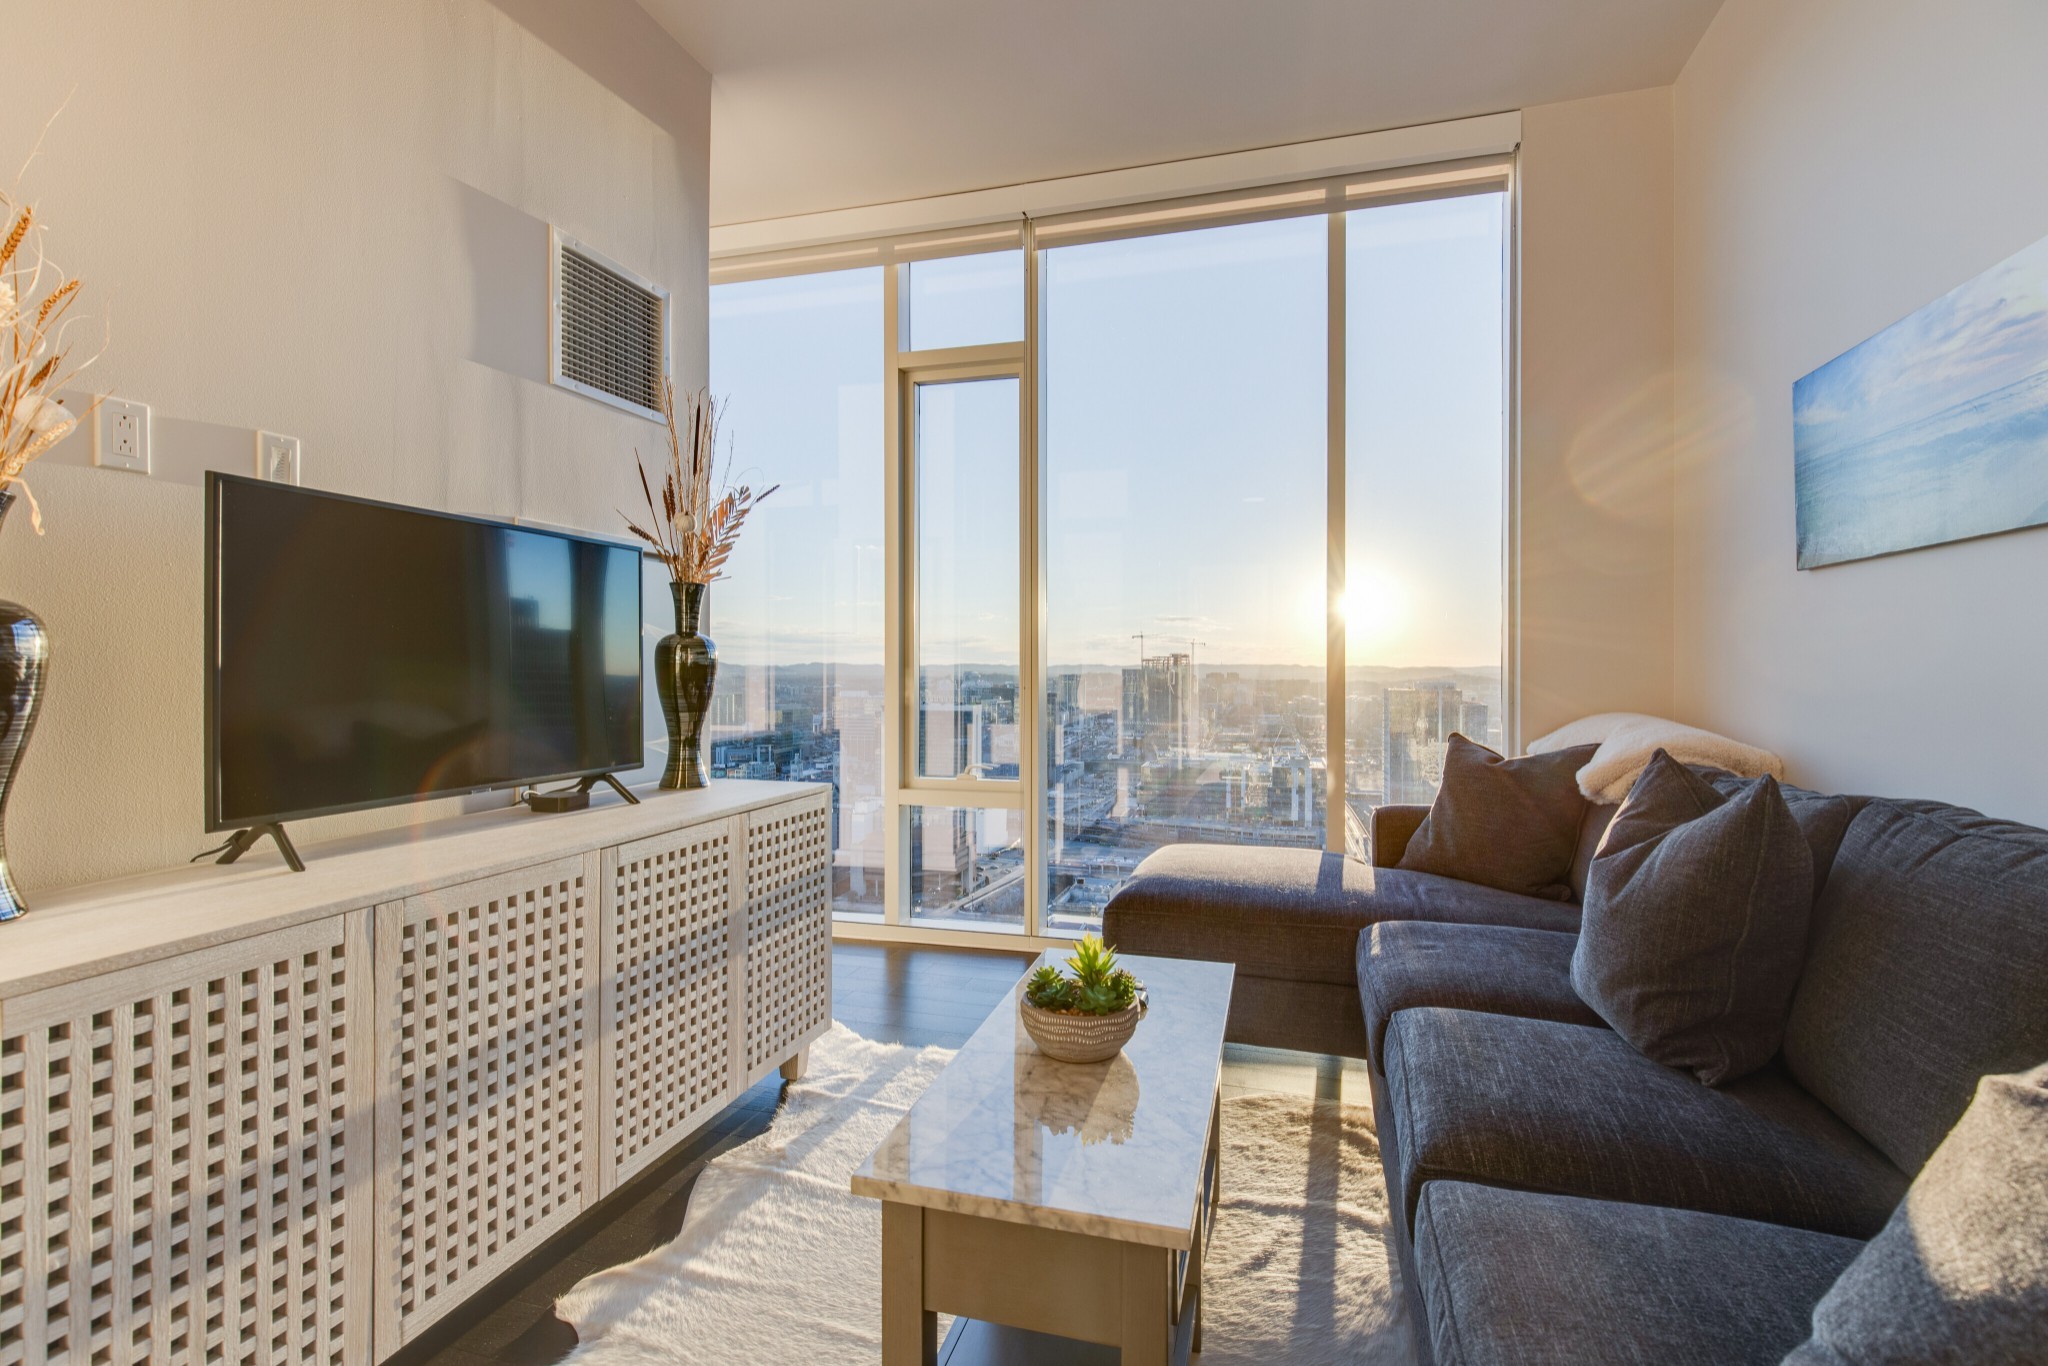 Furnishings and sunset views over the city included!